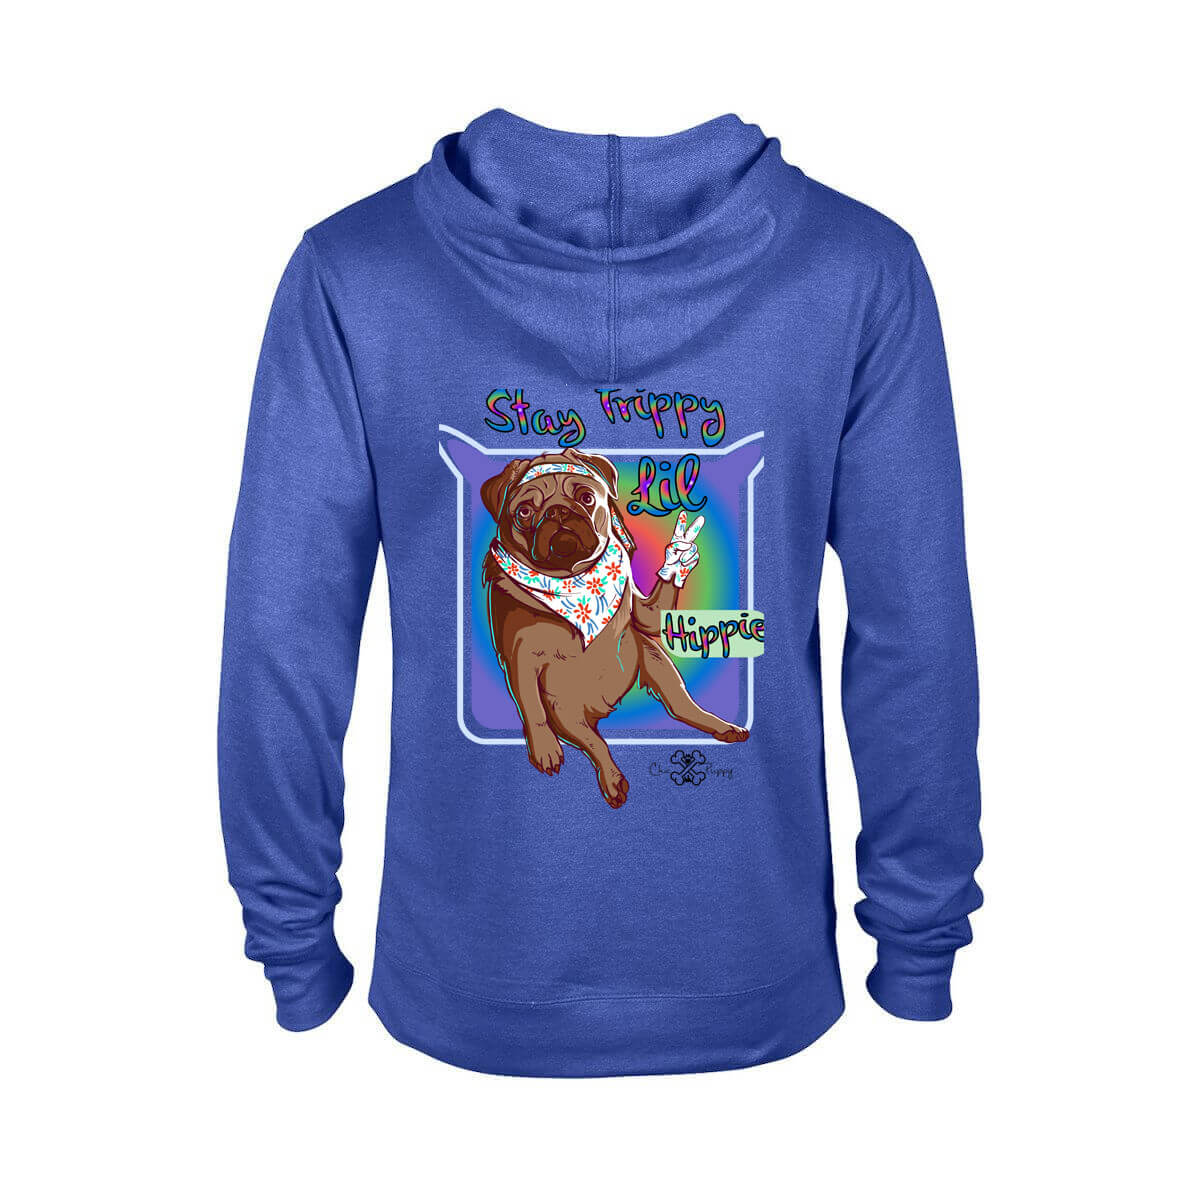 Matching Dog and Owner - Stay Trippy Lil Hippie - Youth Hoodies - Youth